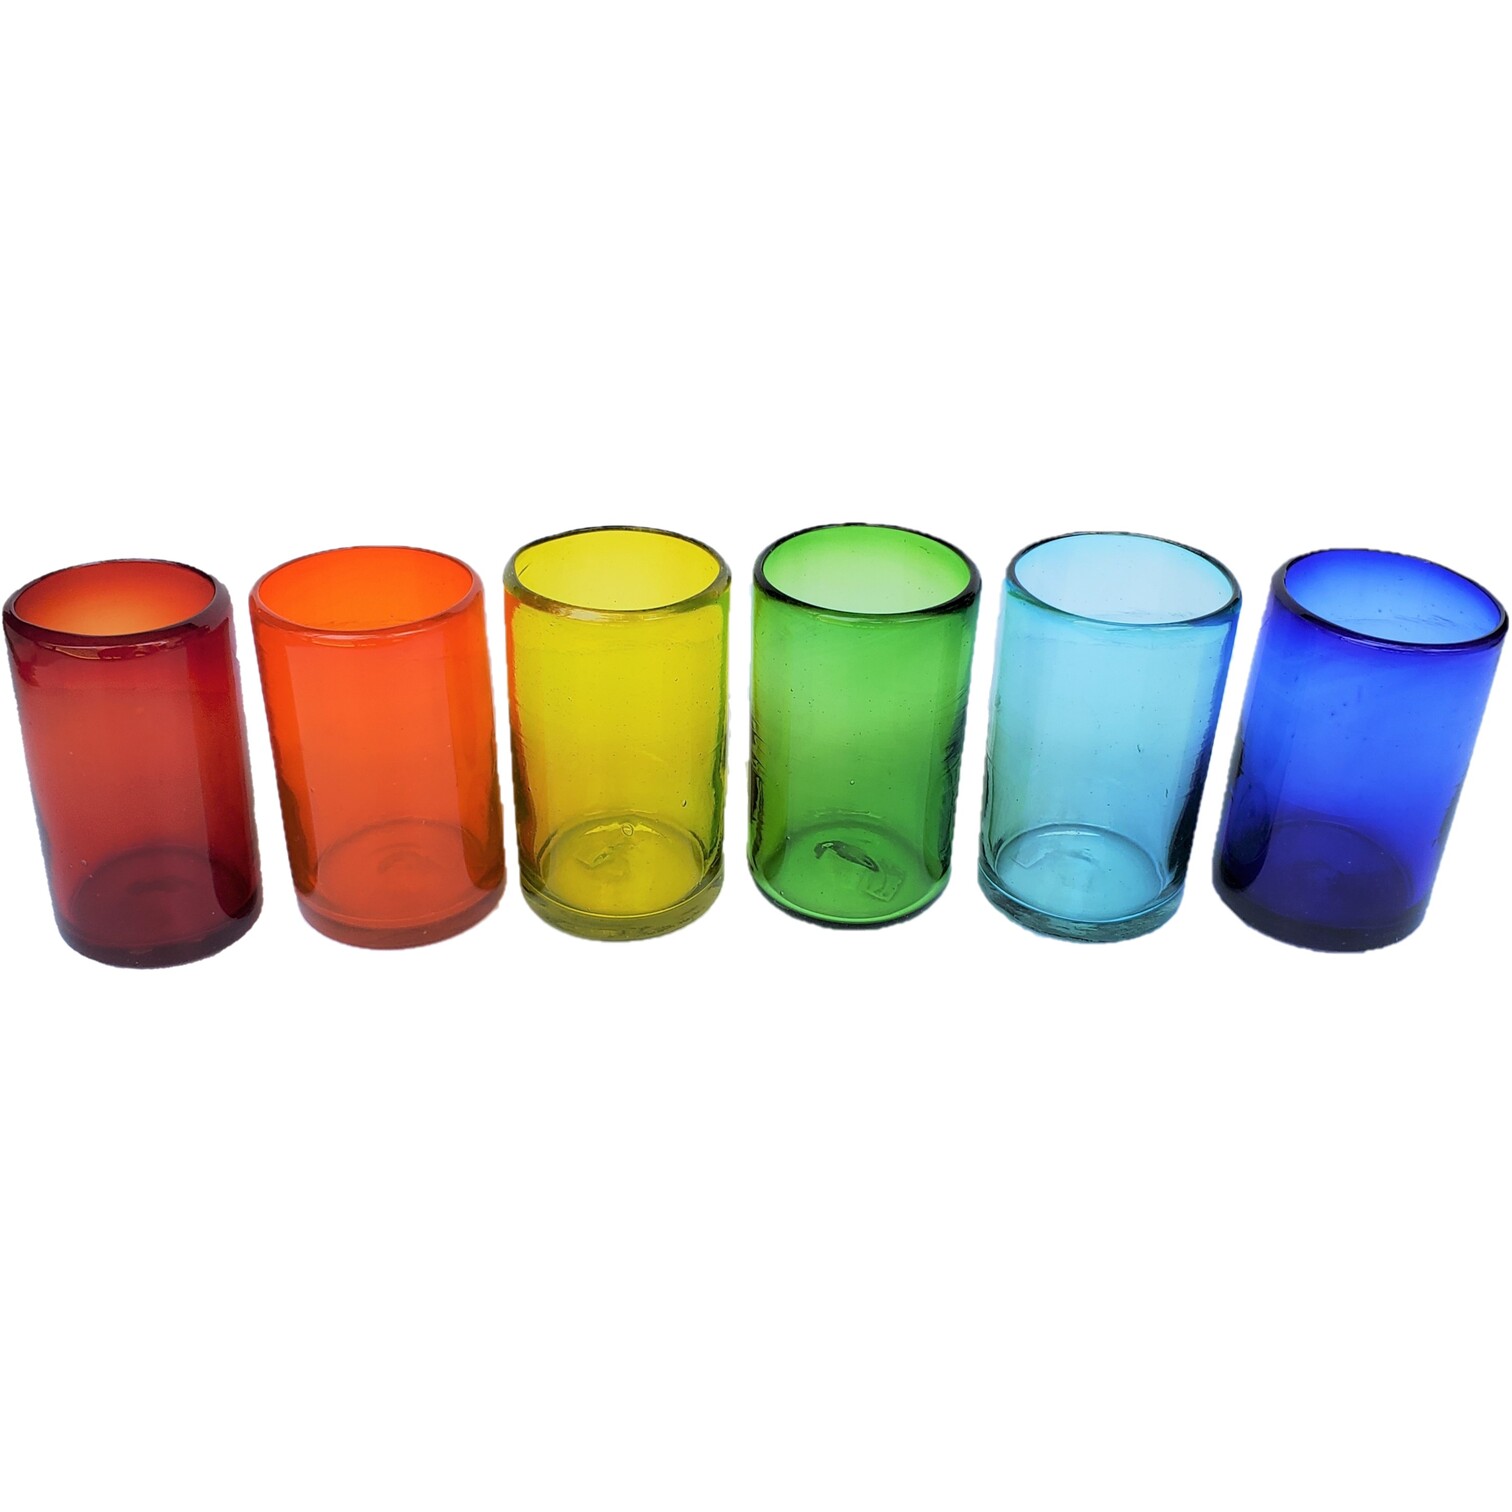 Rainbow Colored 14 oz Drinking Glasses 